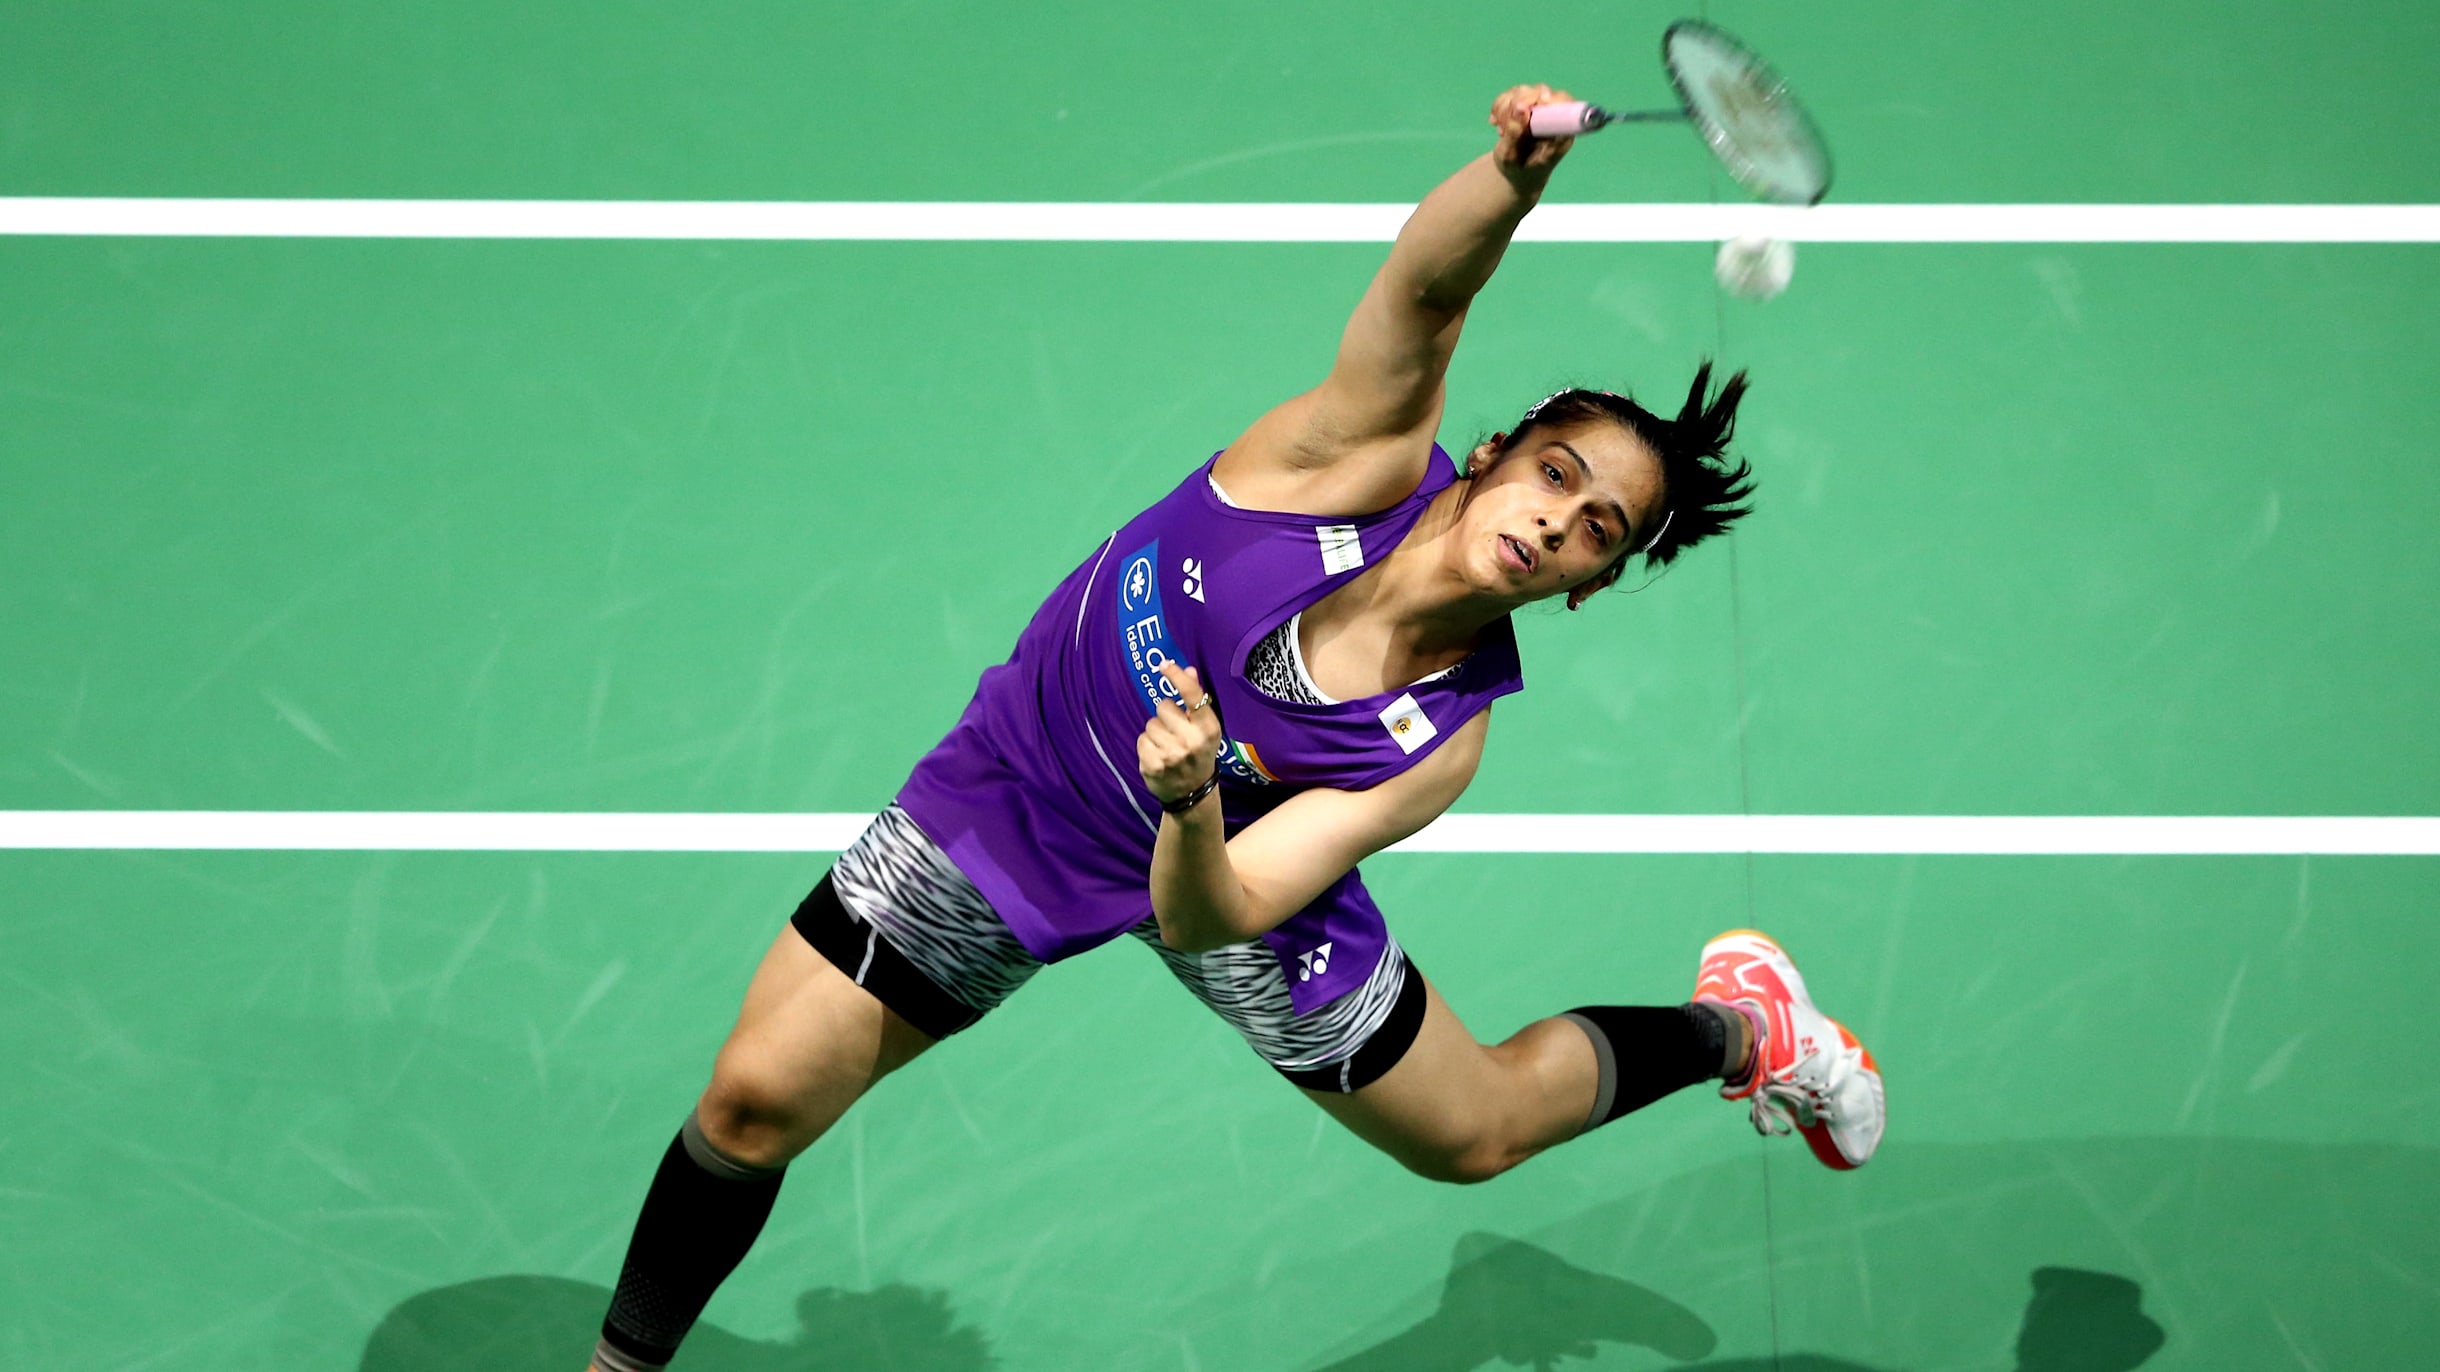 Orleans Masters 2021 badminton draw Get full schedule for Saina Nehwal, Kidambi Srikanth and other Indian shuttlers, watch live streaming